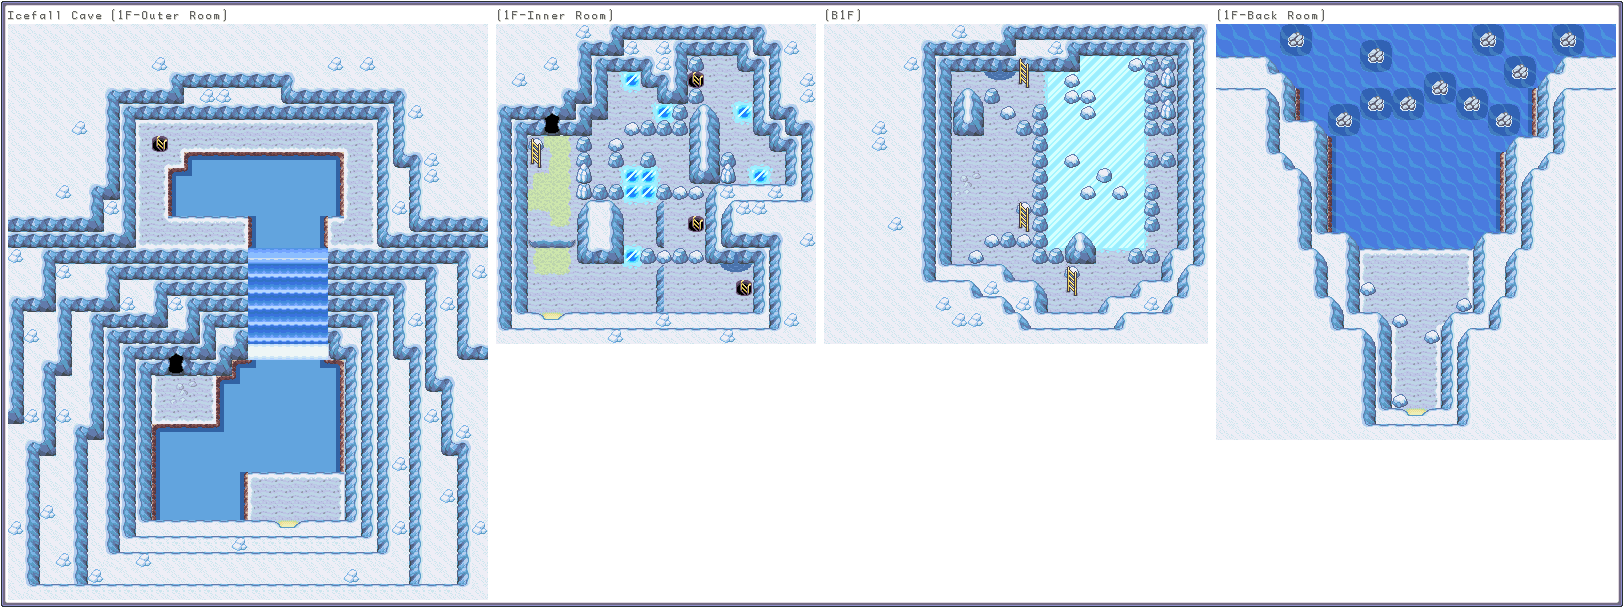 the-spriters-resource-full-sheet-view-pok-mon-firered-leafgreen-icefall-cave